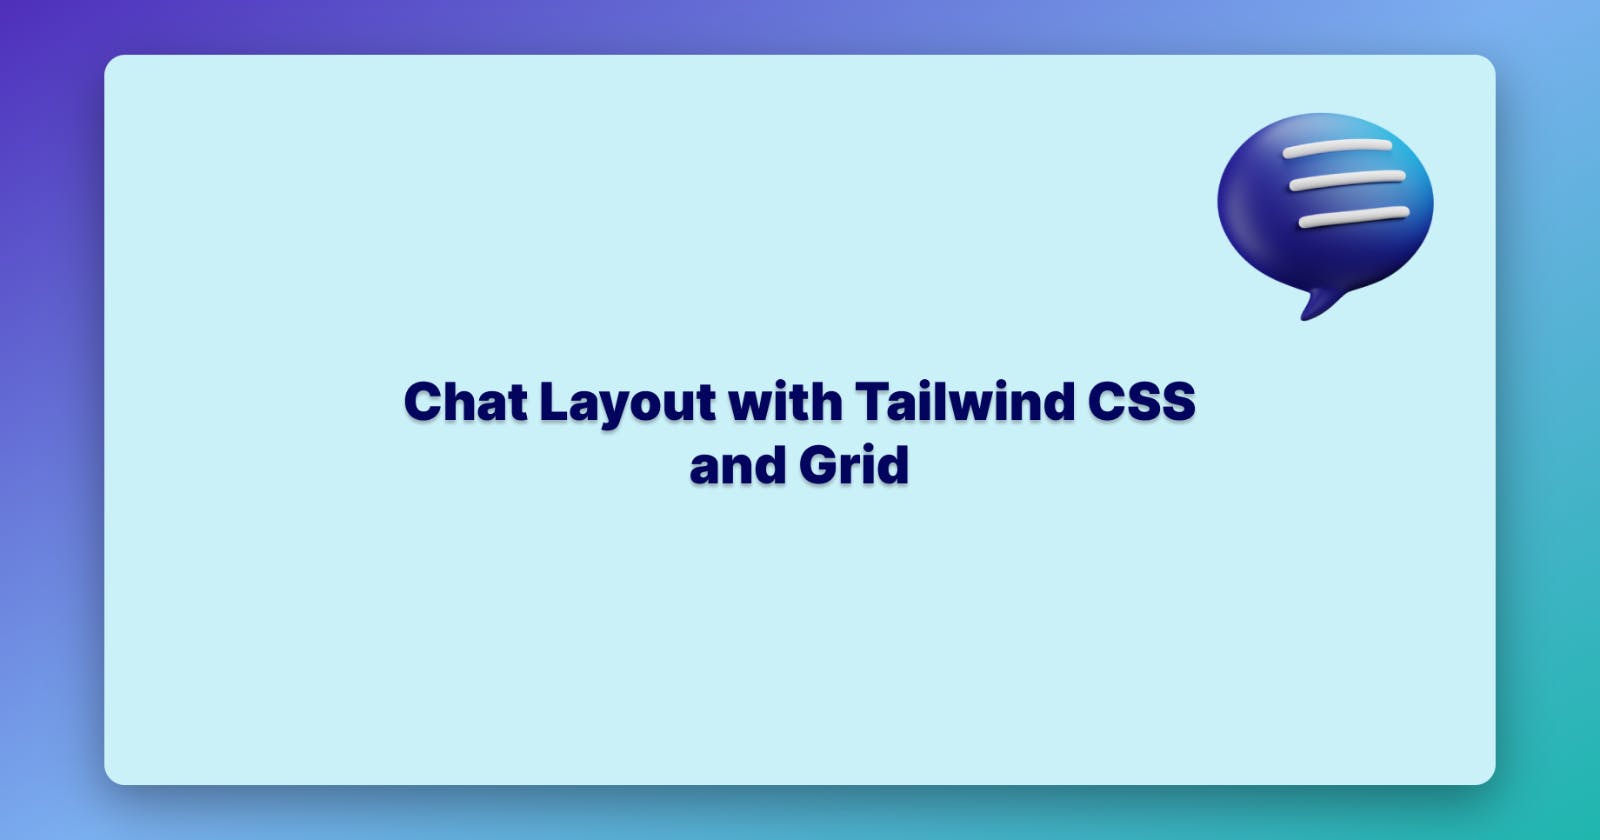 Chat Layout with Tailwind CSS and Grid